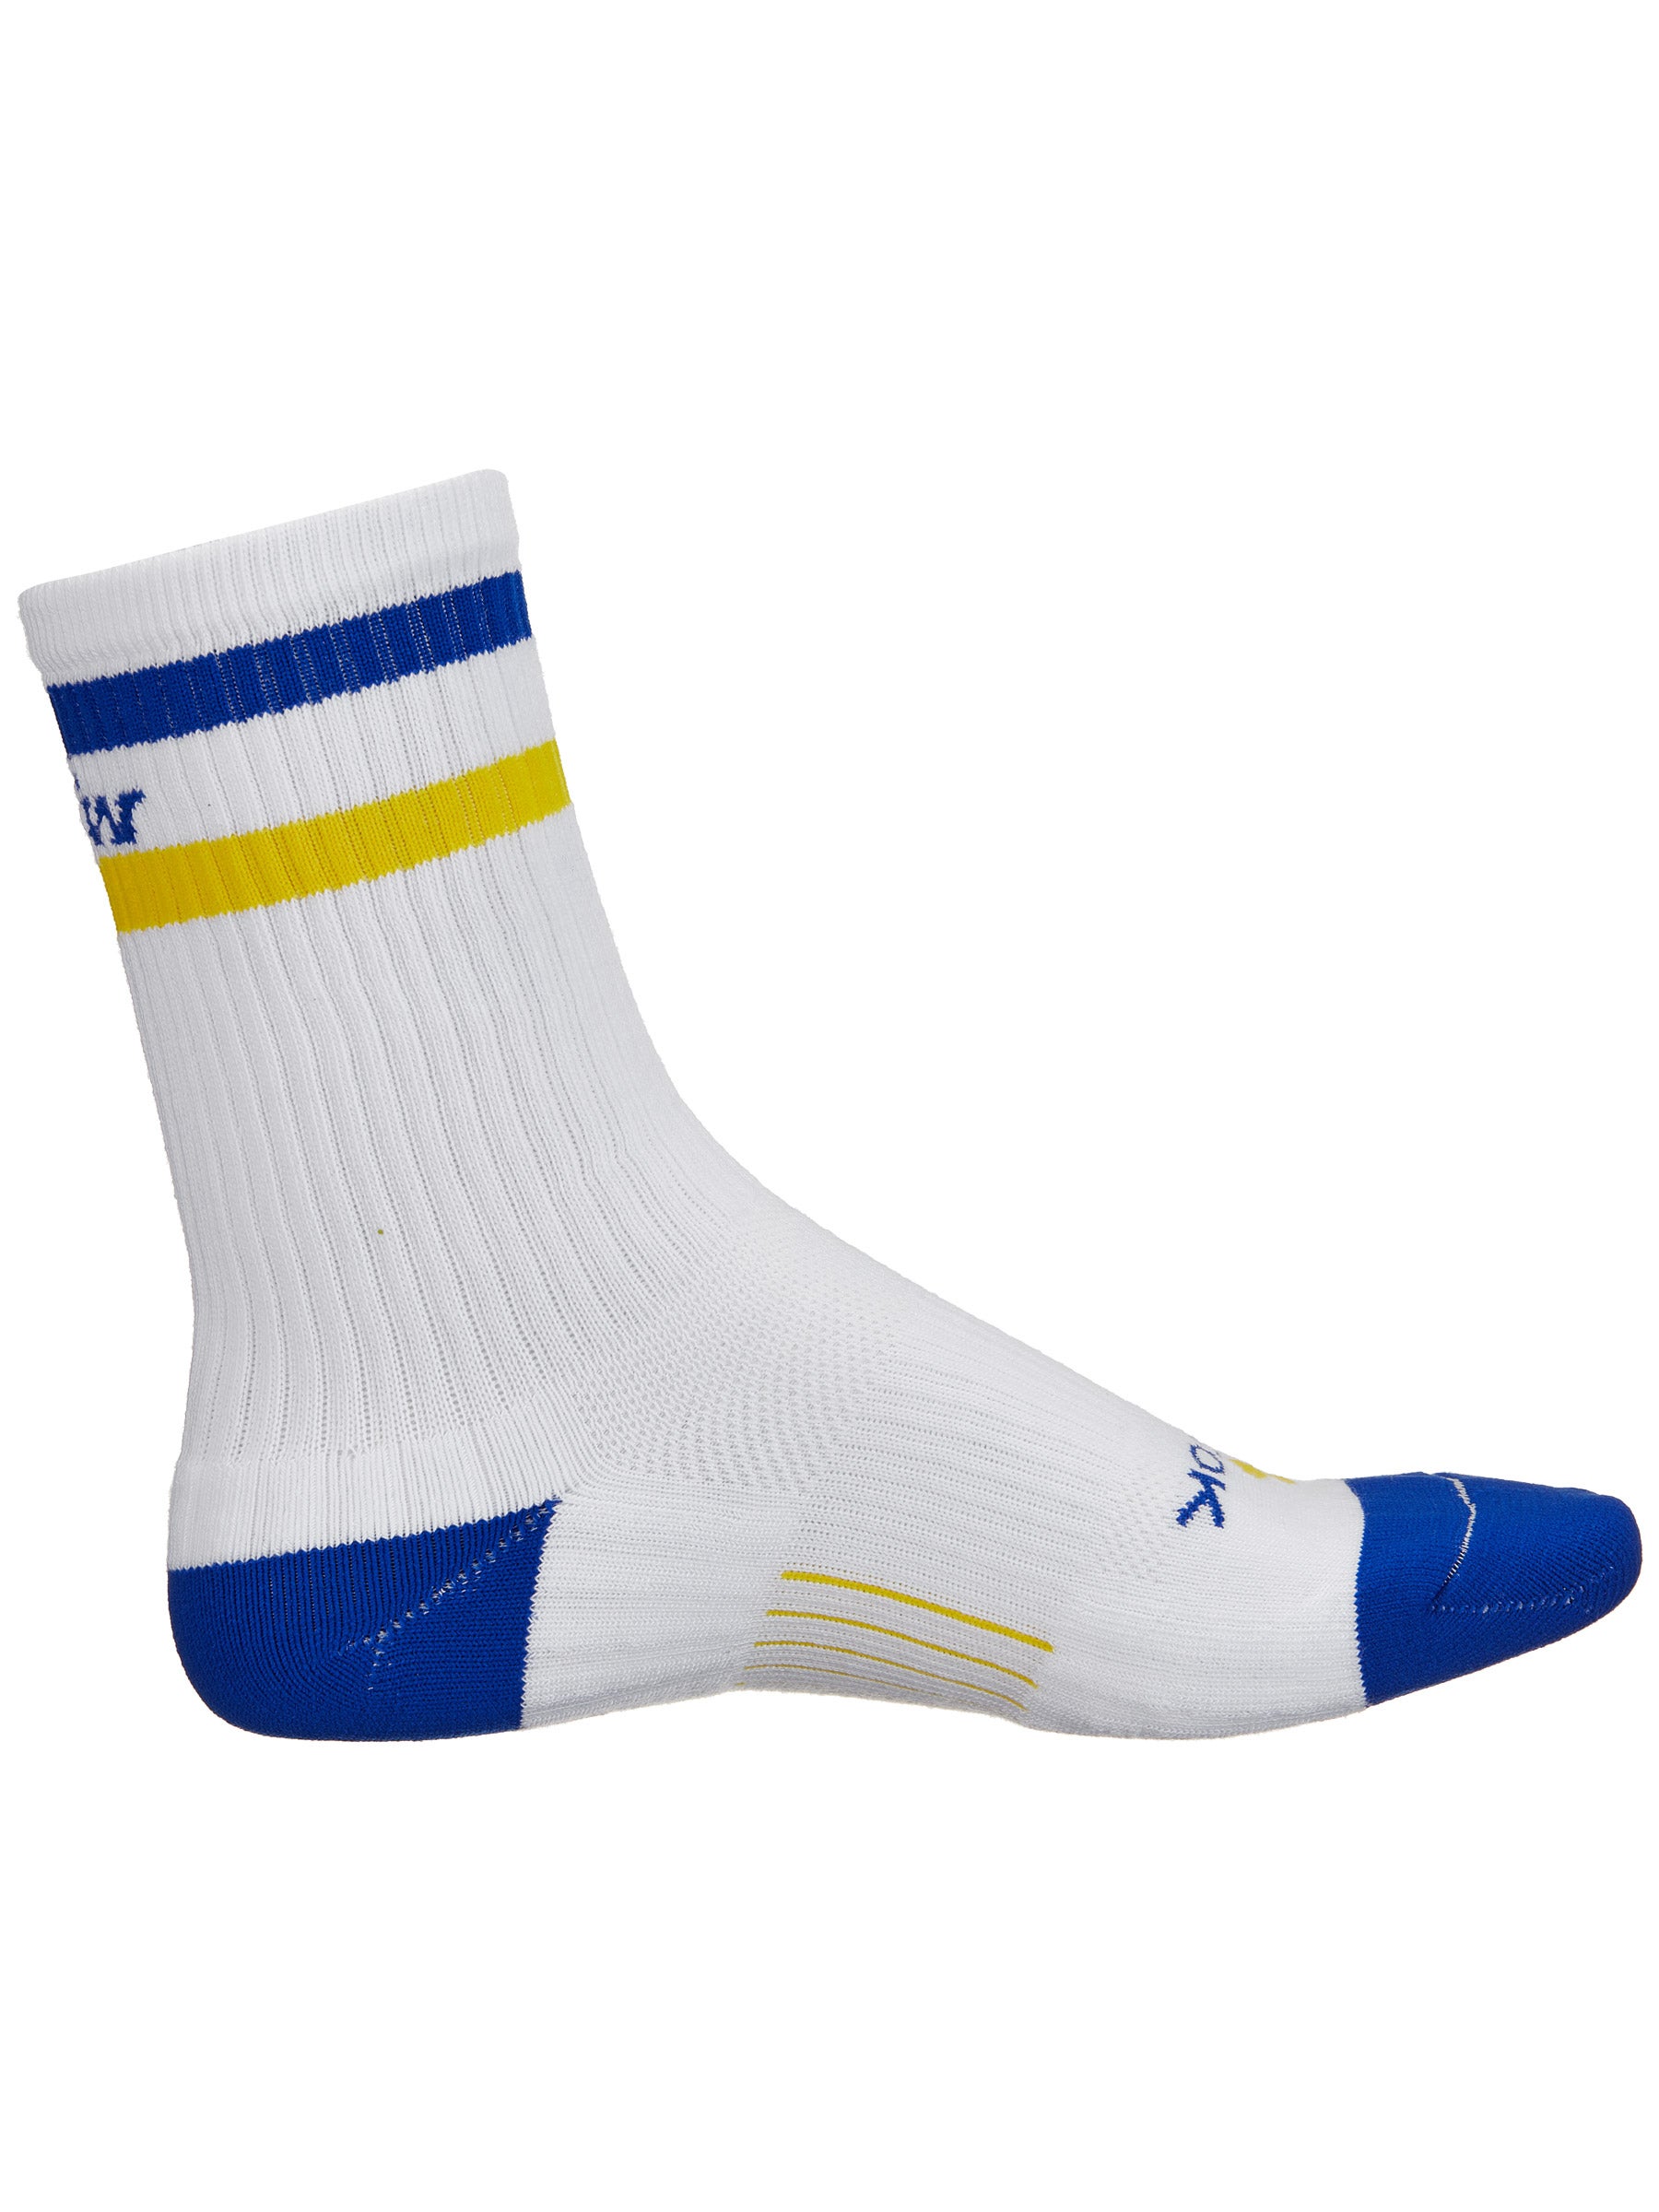 Stripe 13.98x3.54 Comfortable & Breathable Casual and Athletic Custom Crew Socks for Mens/Womens